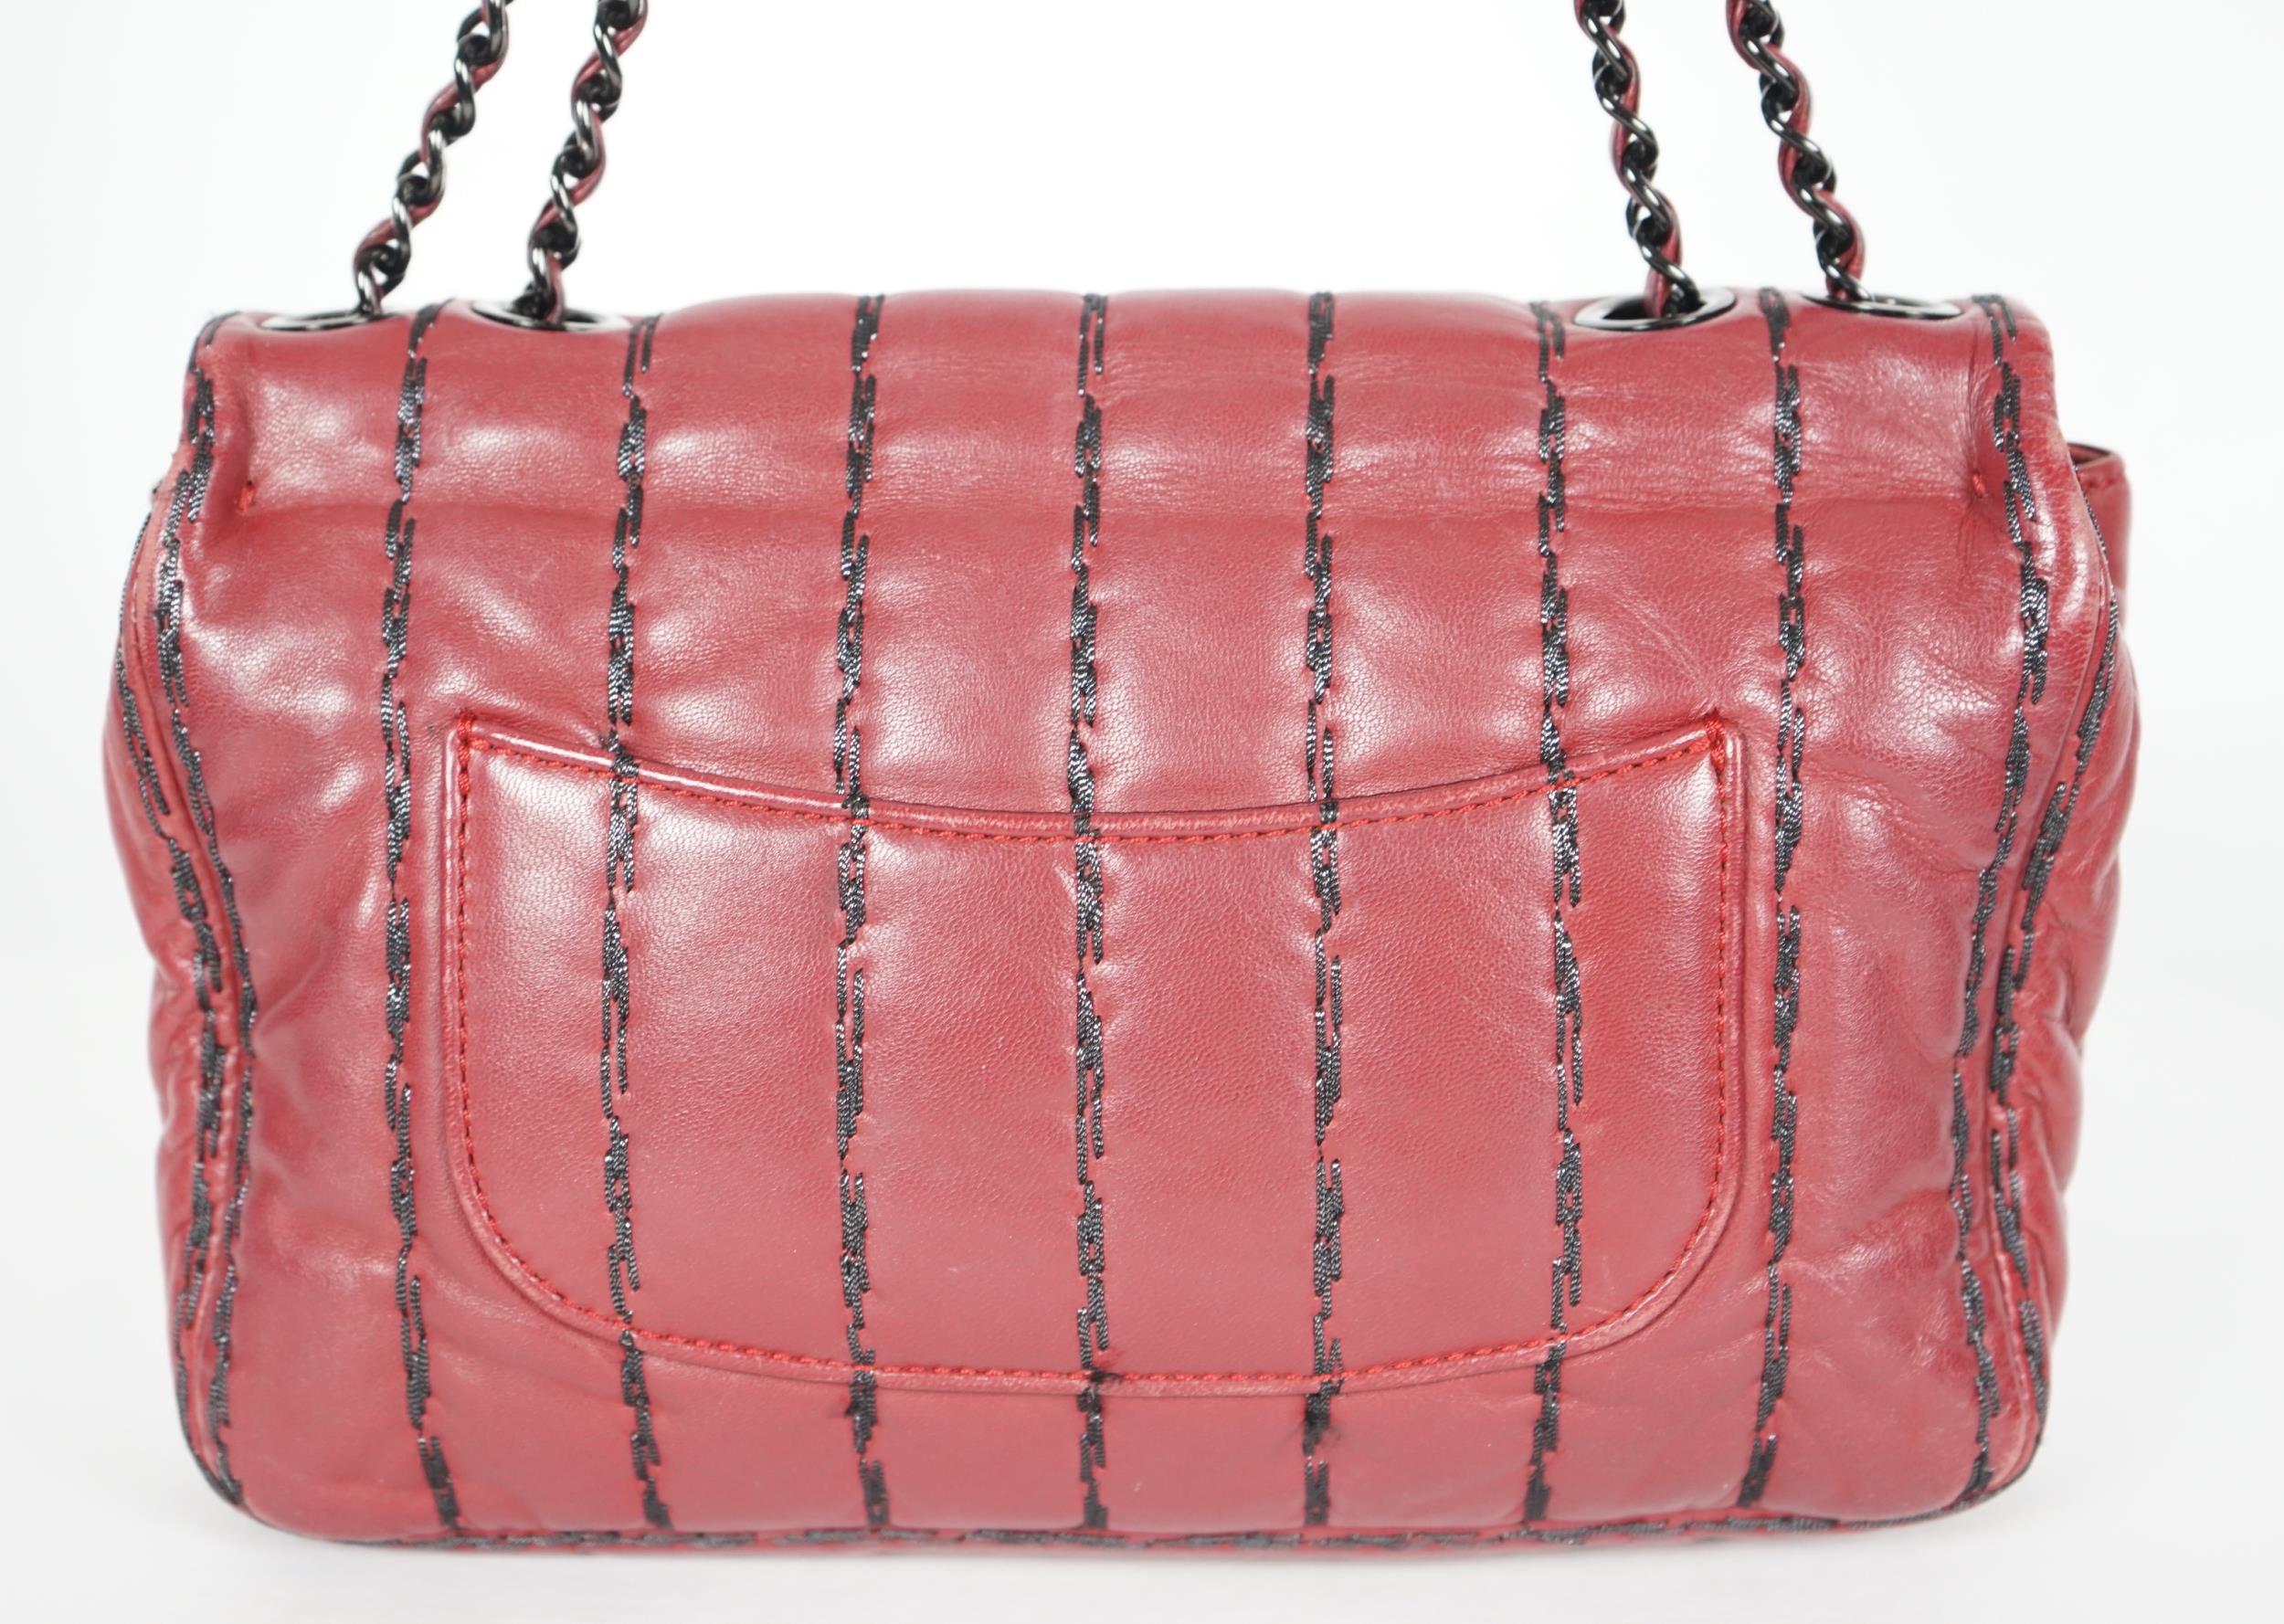 ** ** A Chanel Classic Jumbo Flap burgundy lambskin quilted shoulder bag, with pinstripe - Image 6 of 8